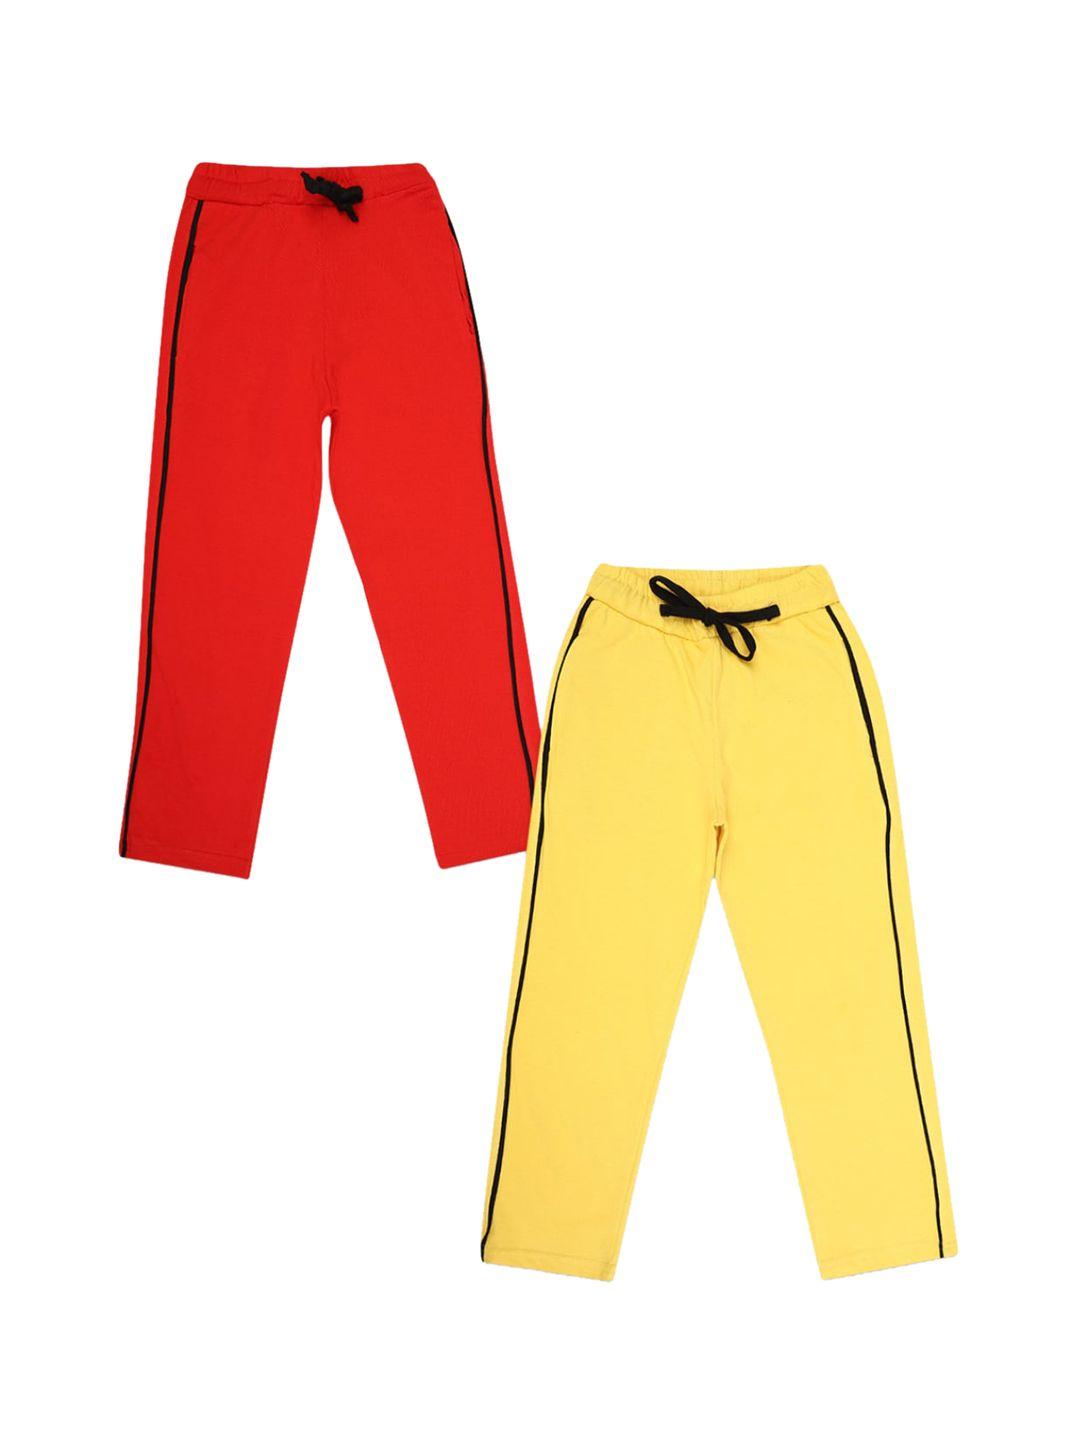 v-mart-boys-pack-of-2-red-&-yellow-cotton-lounge-pants